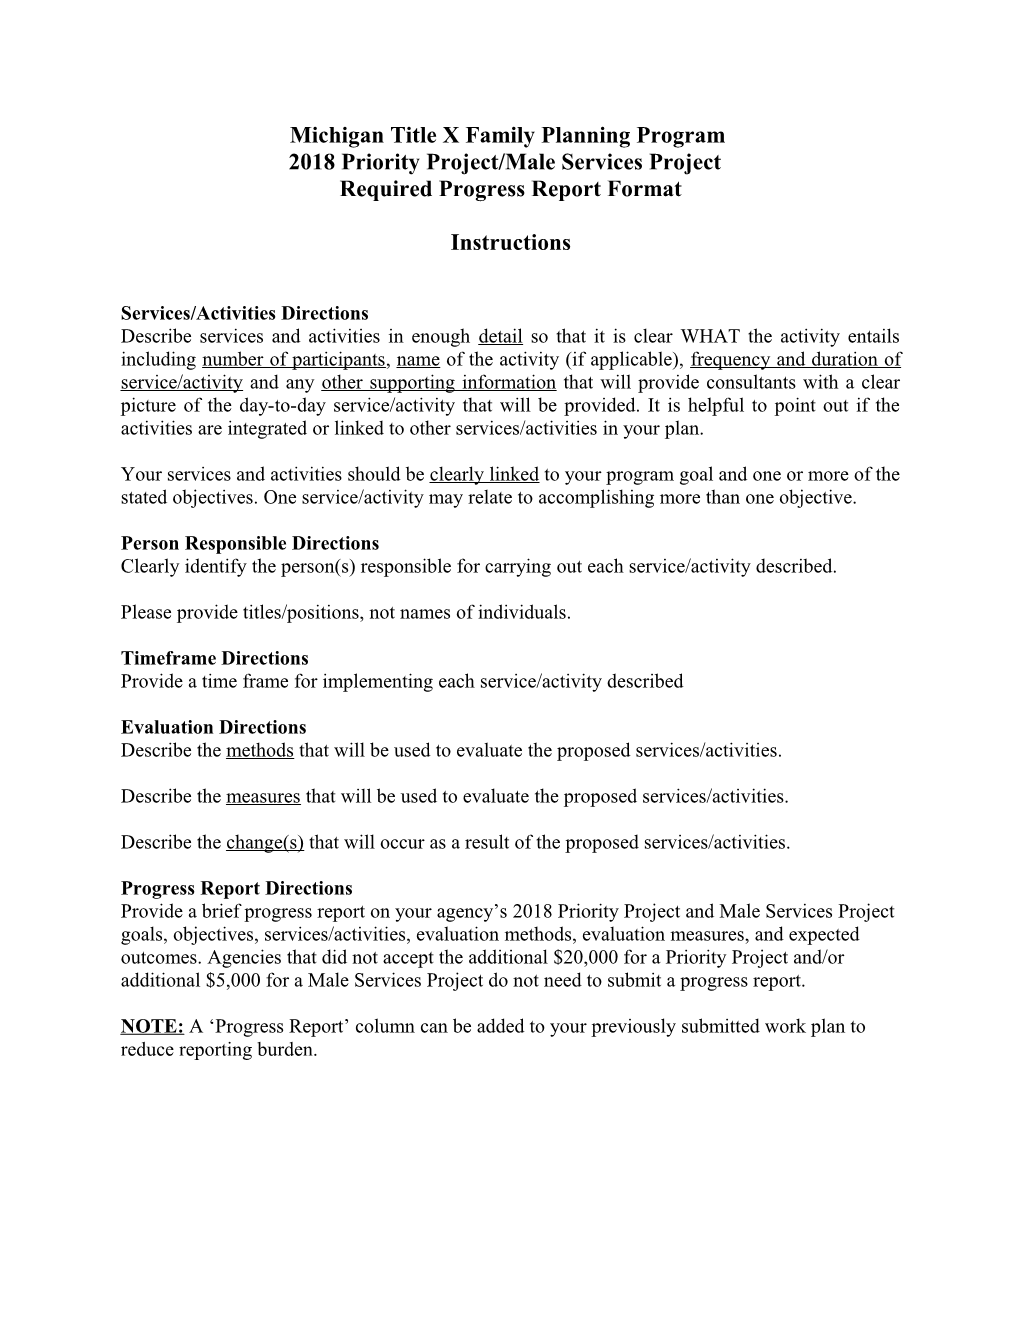 Family Planning Request for Proposal